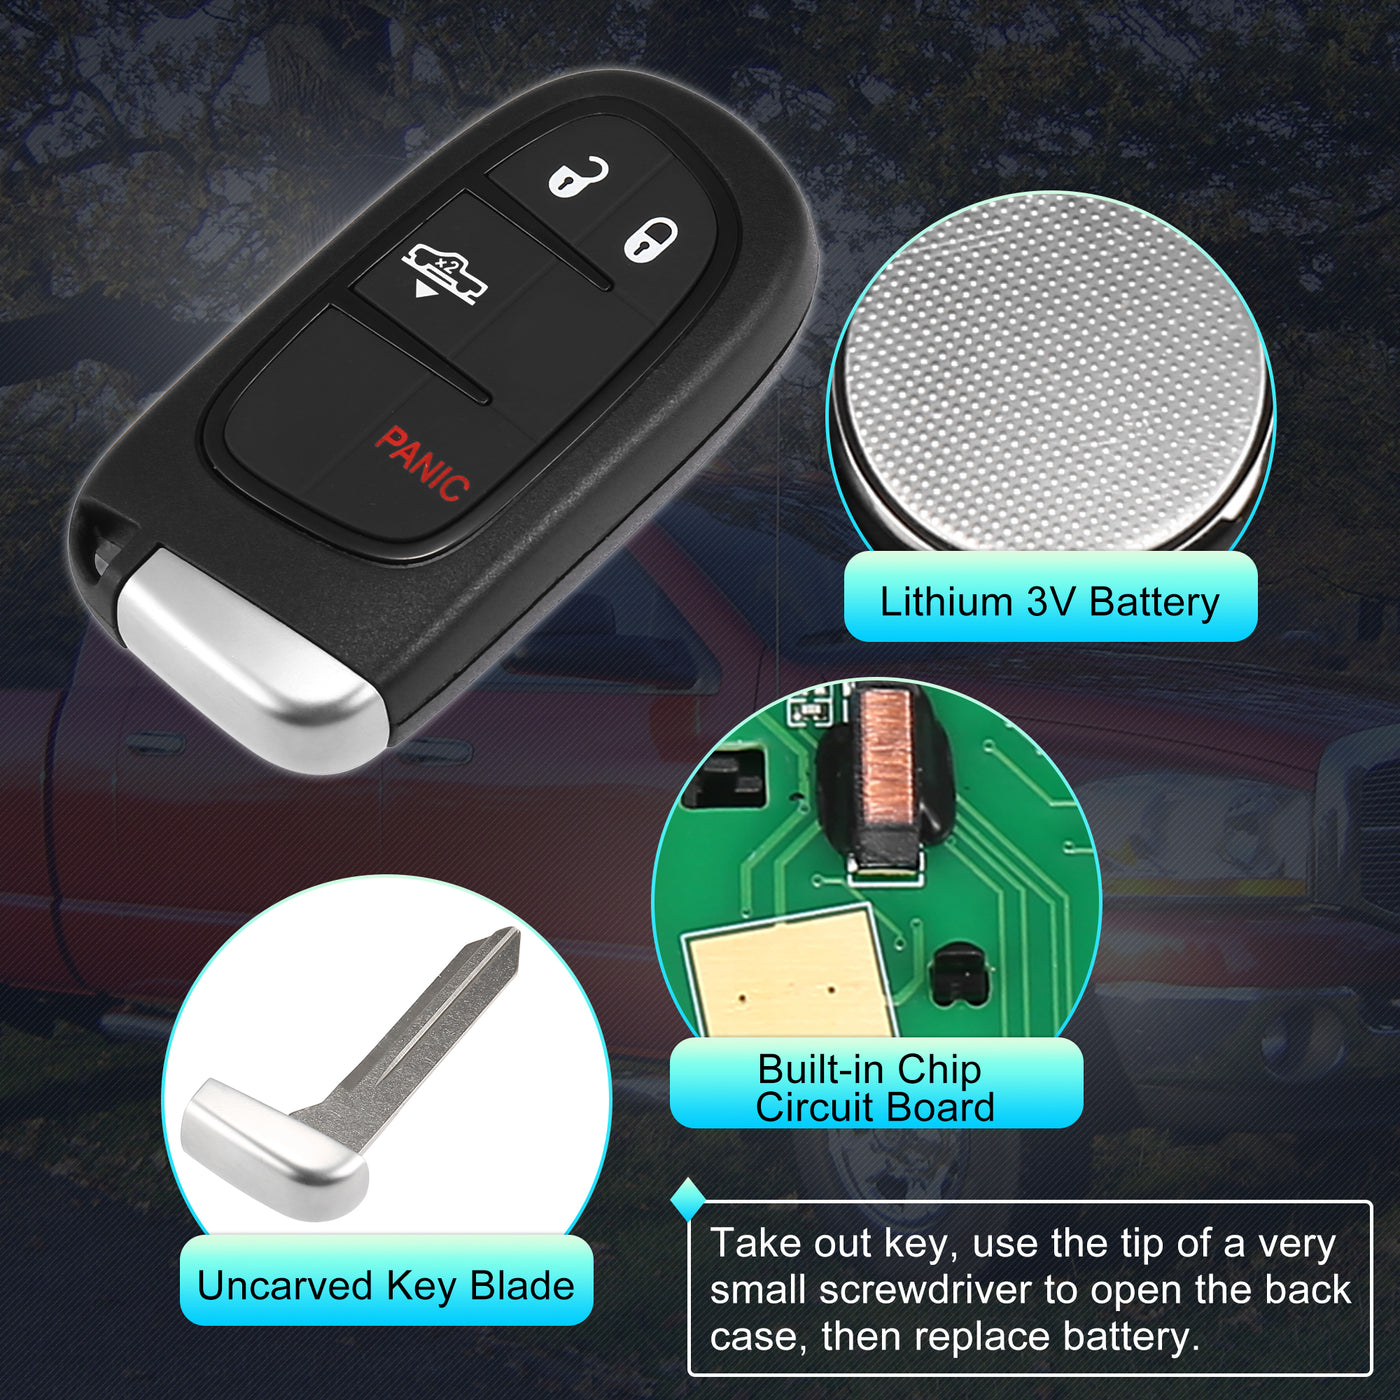 X AUTOHAUX GQ4-54T Replacement Smart Proximit Keyless Entry Remote Key Fob Alarm for Dodge for Ram 1500 2500 3500 Air Suspension Truck 2013-2018 4 Buttons 433MHz 46 Chip 1470A-35T 68159656